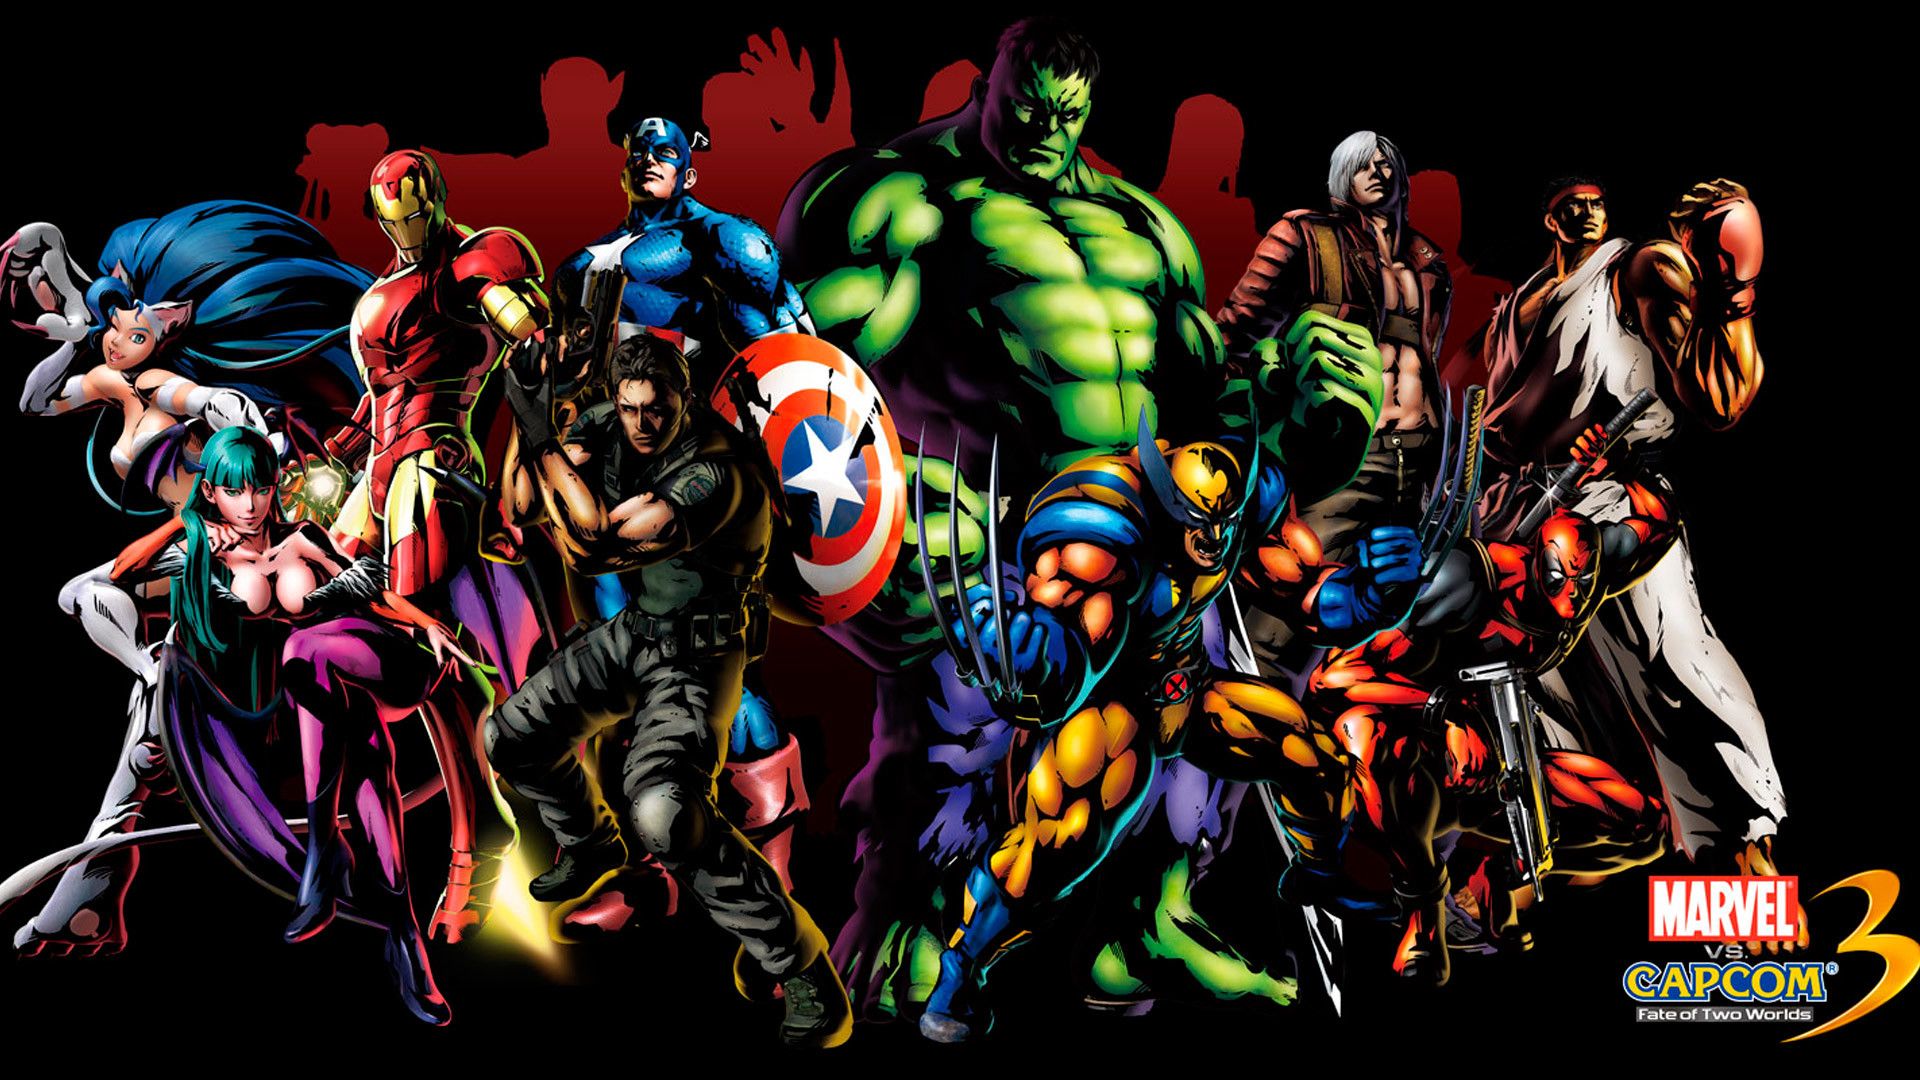 Marvel Screensavers and Wallpapers